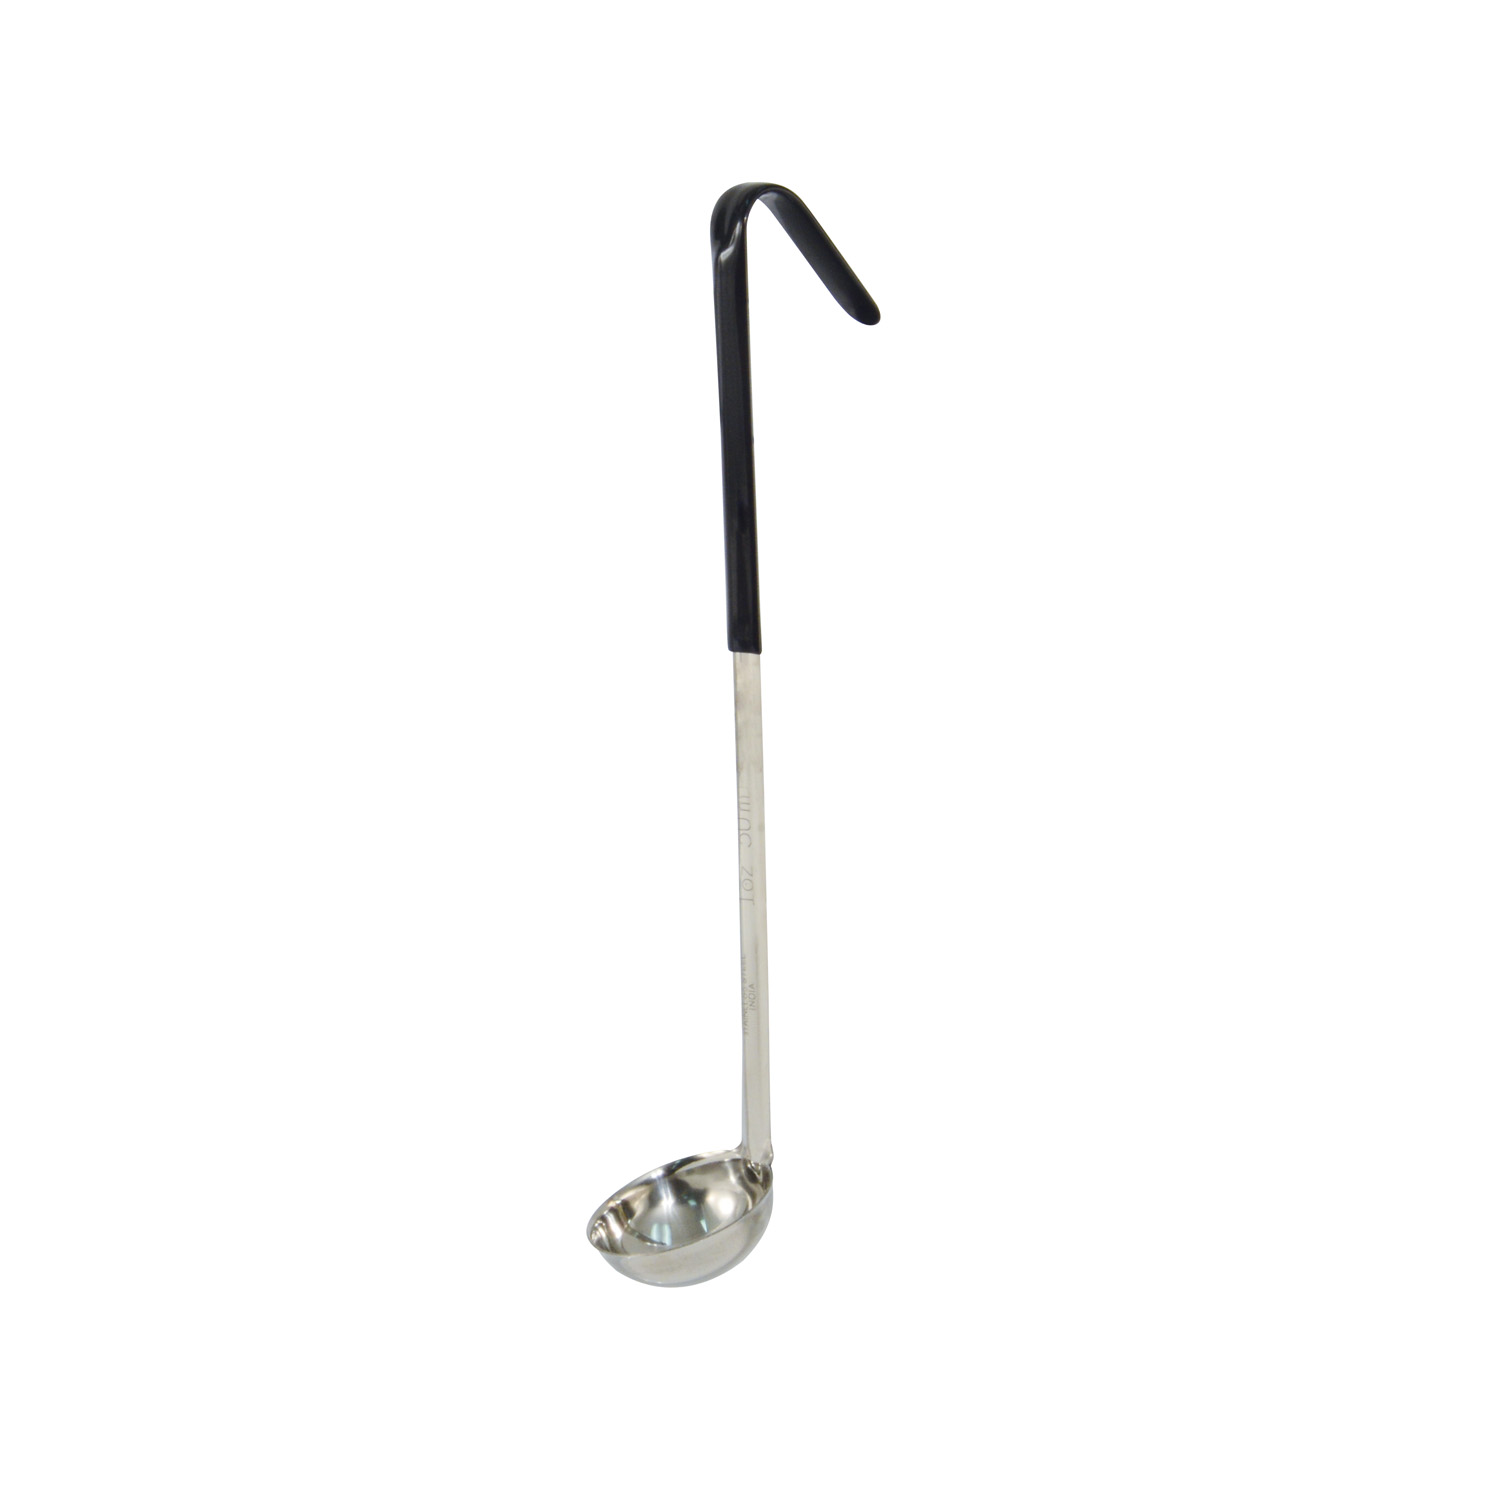 CAC China SSLD-10BK One-Piece Stainless Steel Ladle with Black Handle 1 oz.